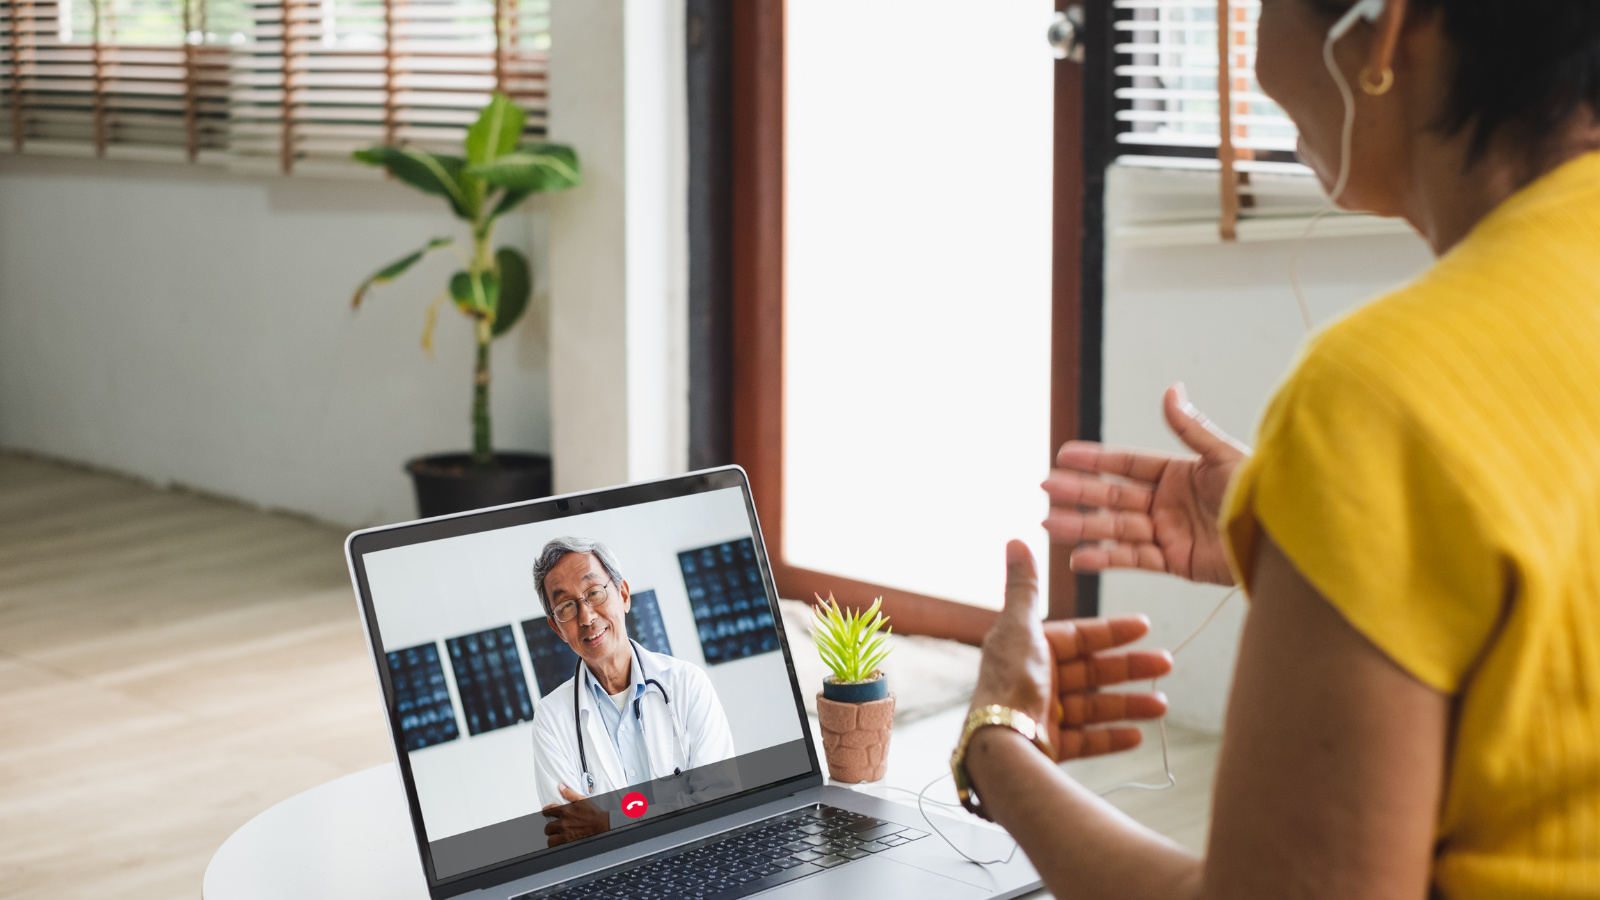 Woman on video chat with doctor